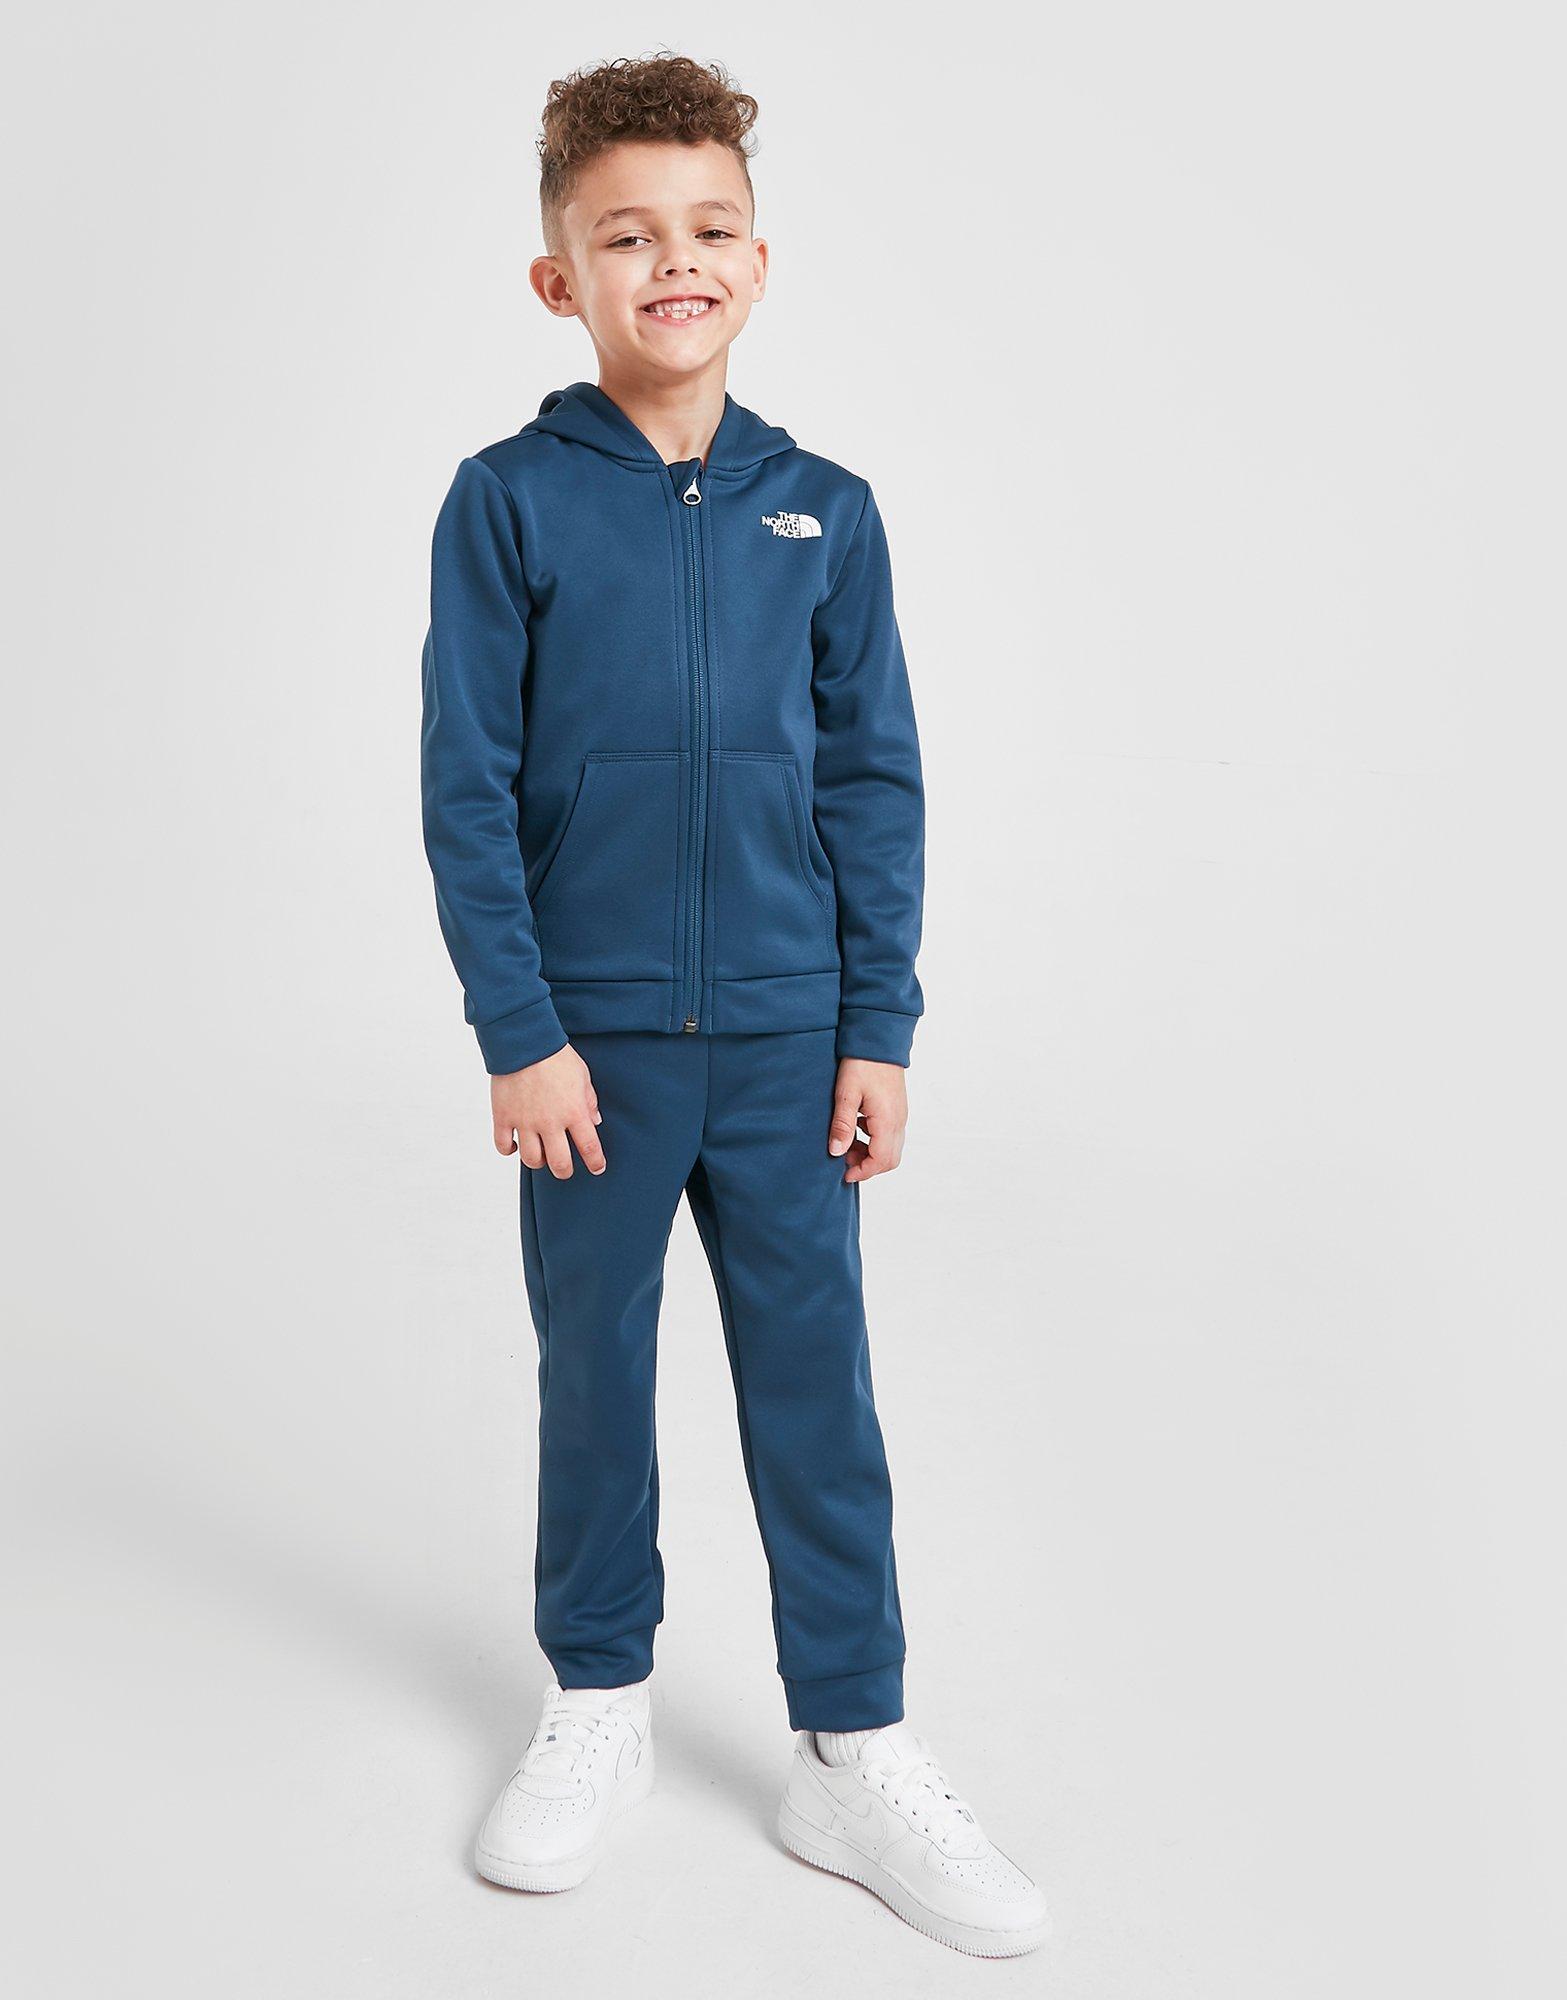 north face tracksuit for kids